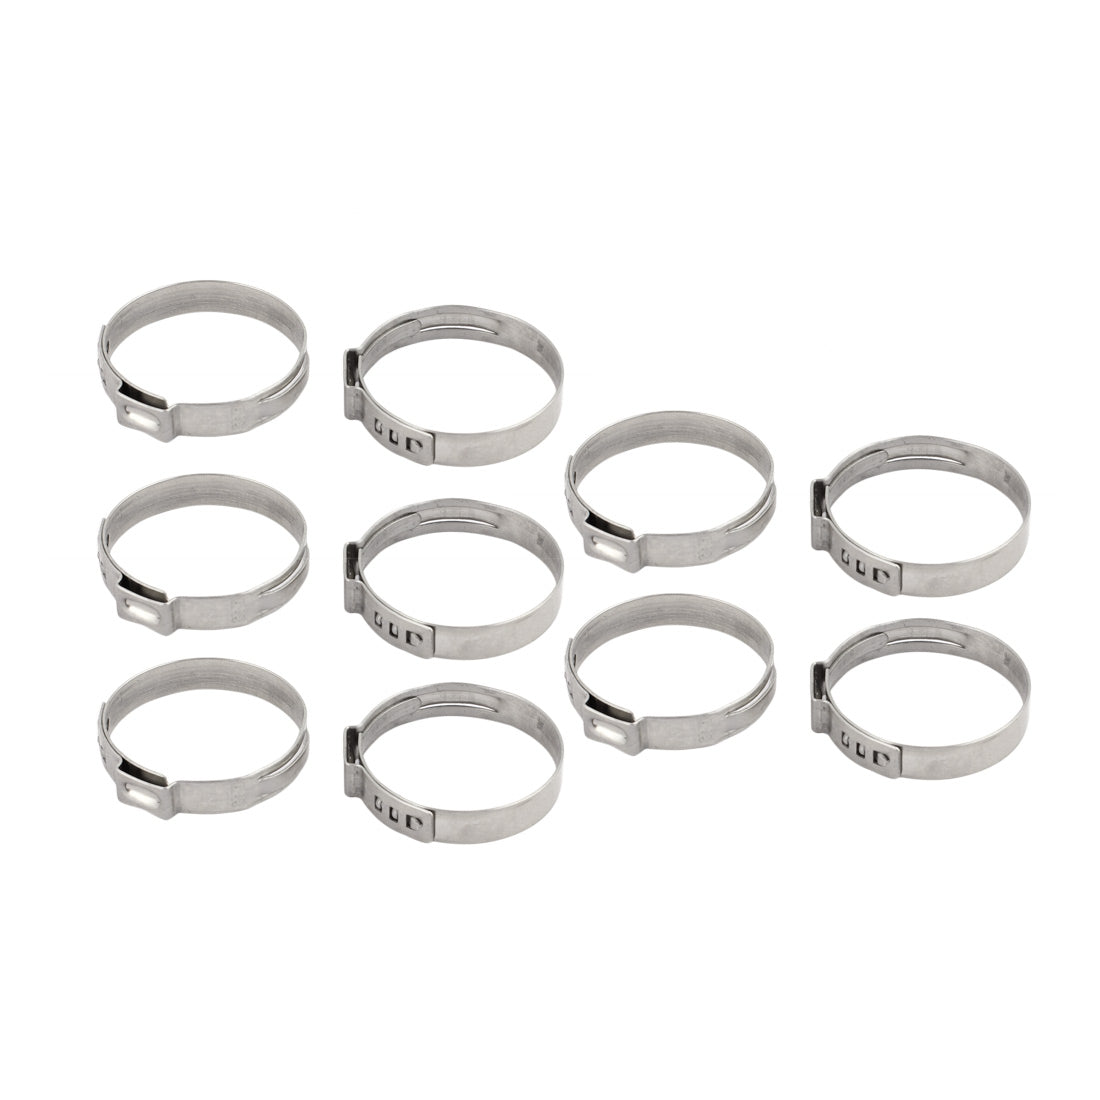 uxcell Uxcell 29.9mm-33.1mm 304 Stainless Steel Adjustable Tube Hose Clamps Silver Tone 10pcs